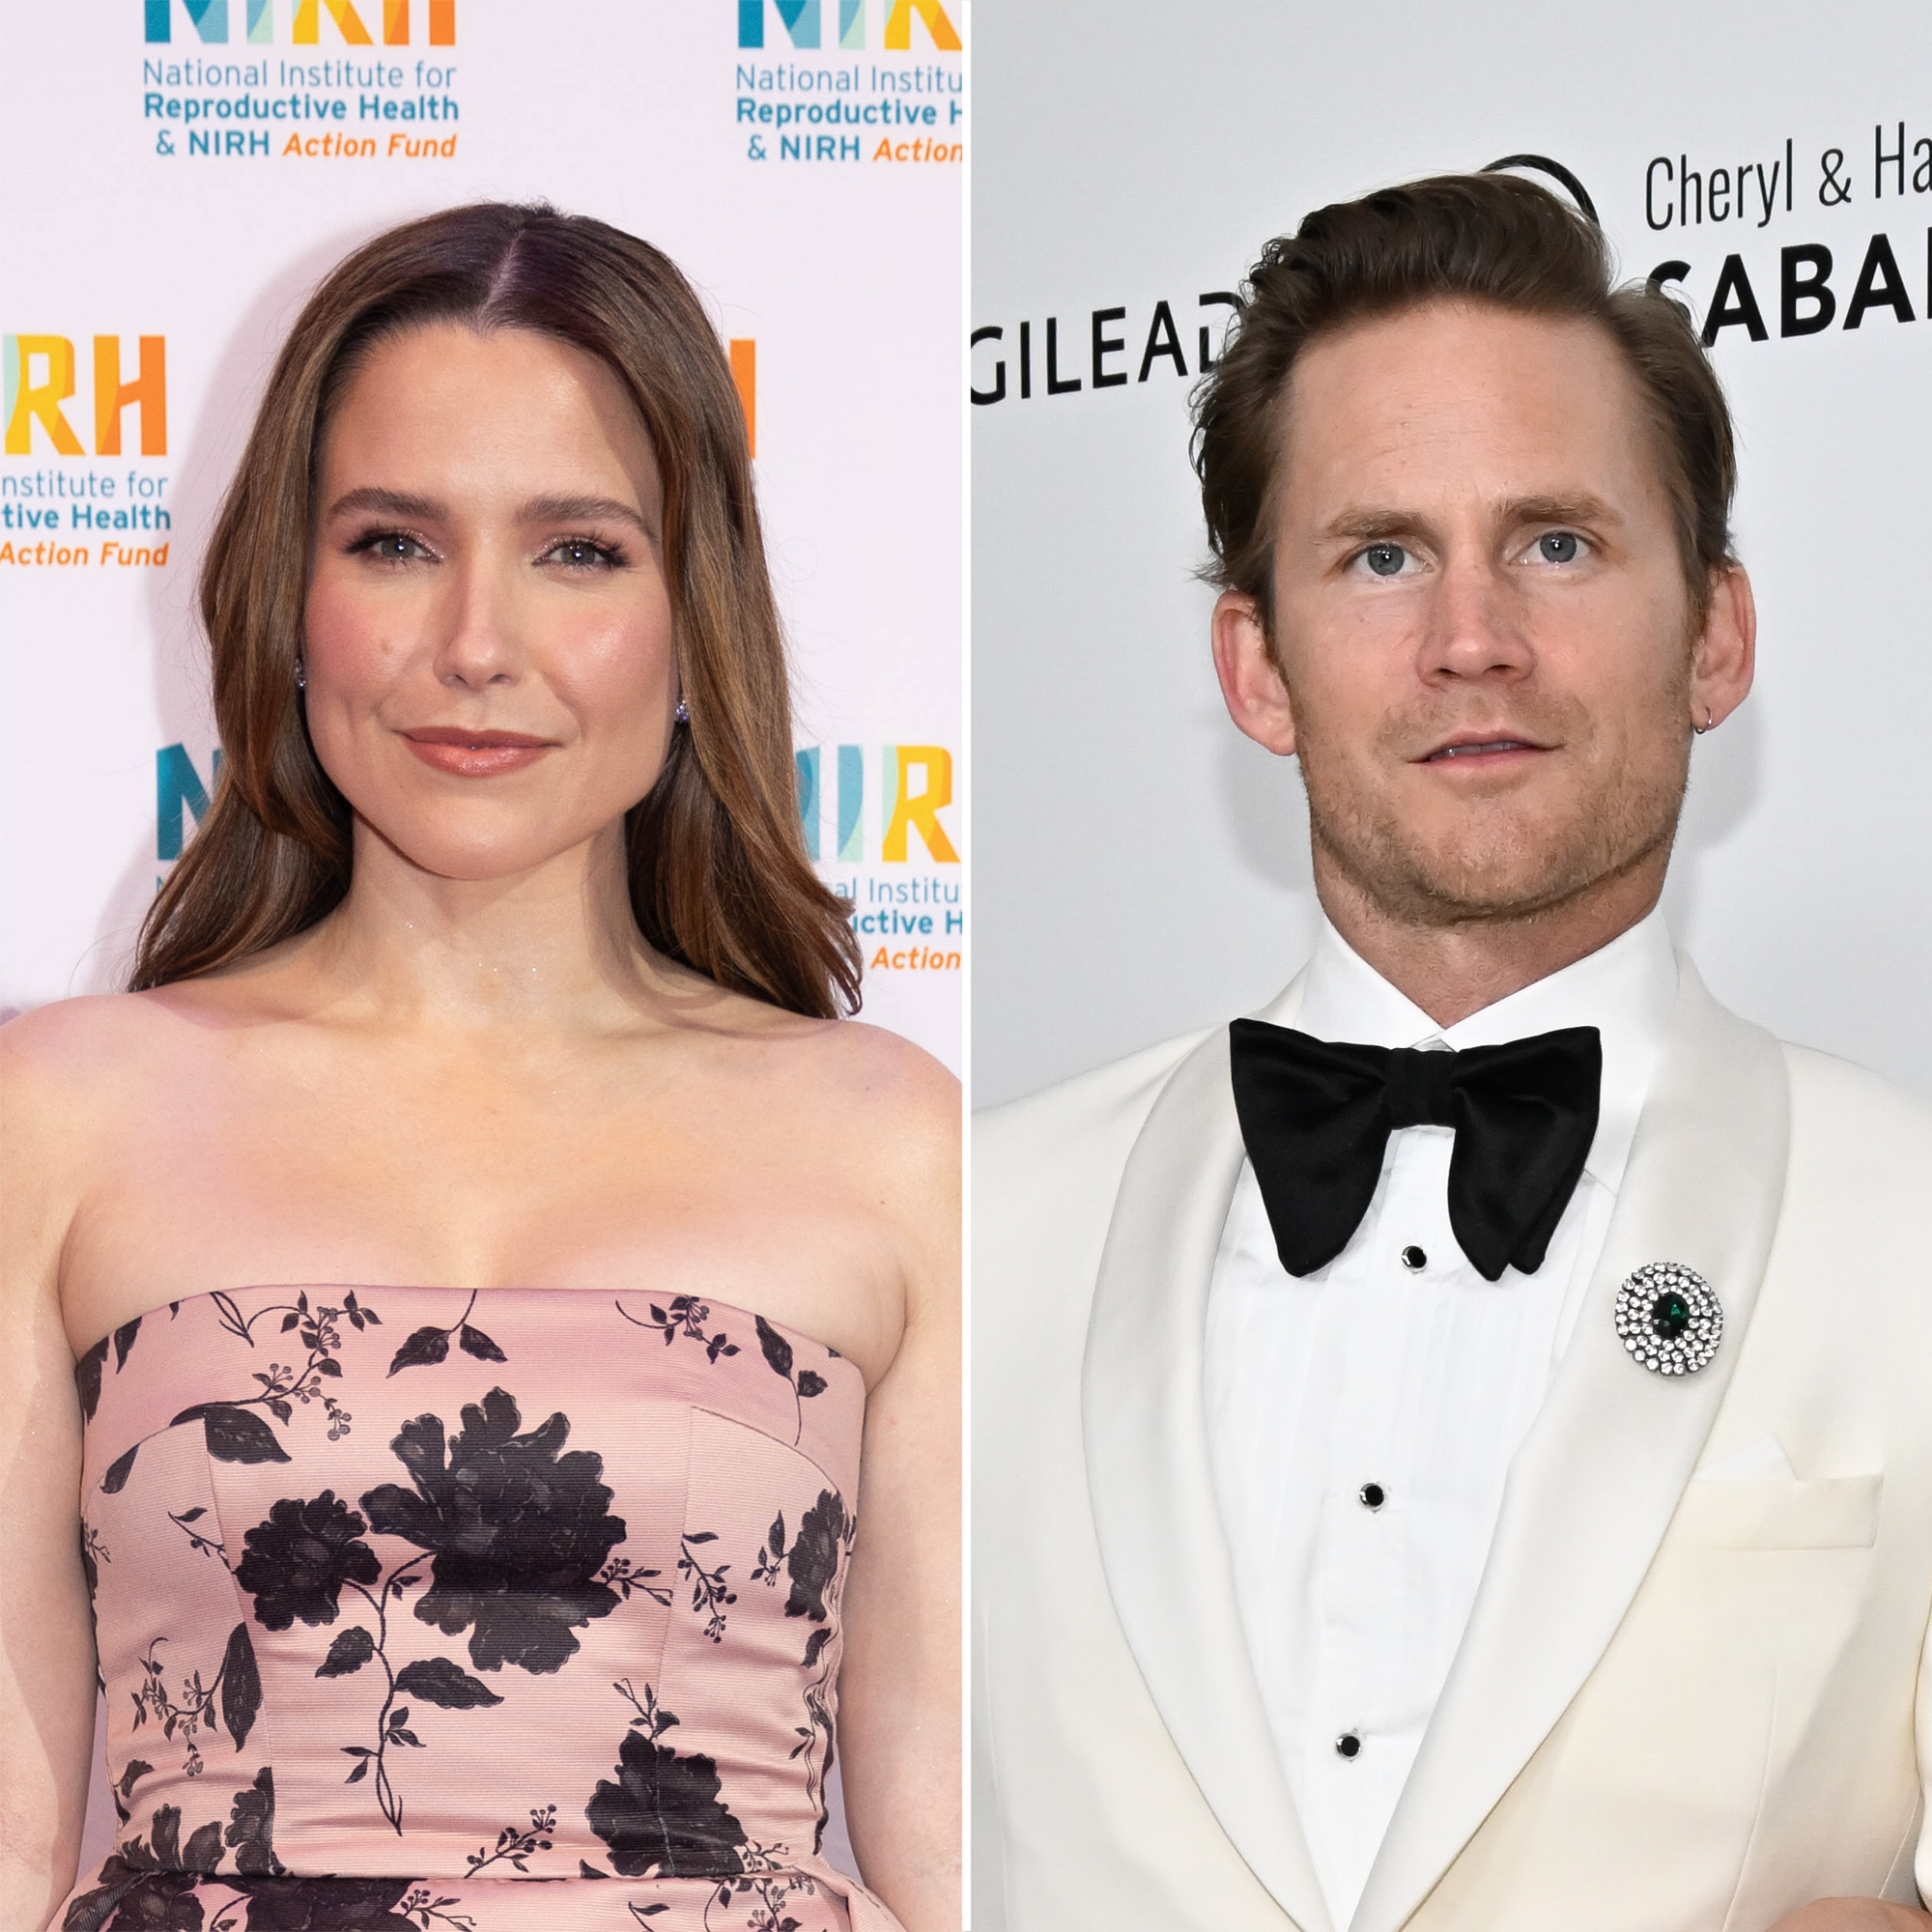 Who Is Sophia Bush's Ex-Husband? All About Grant Hughes